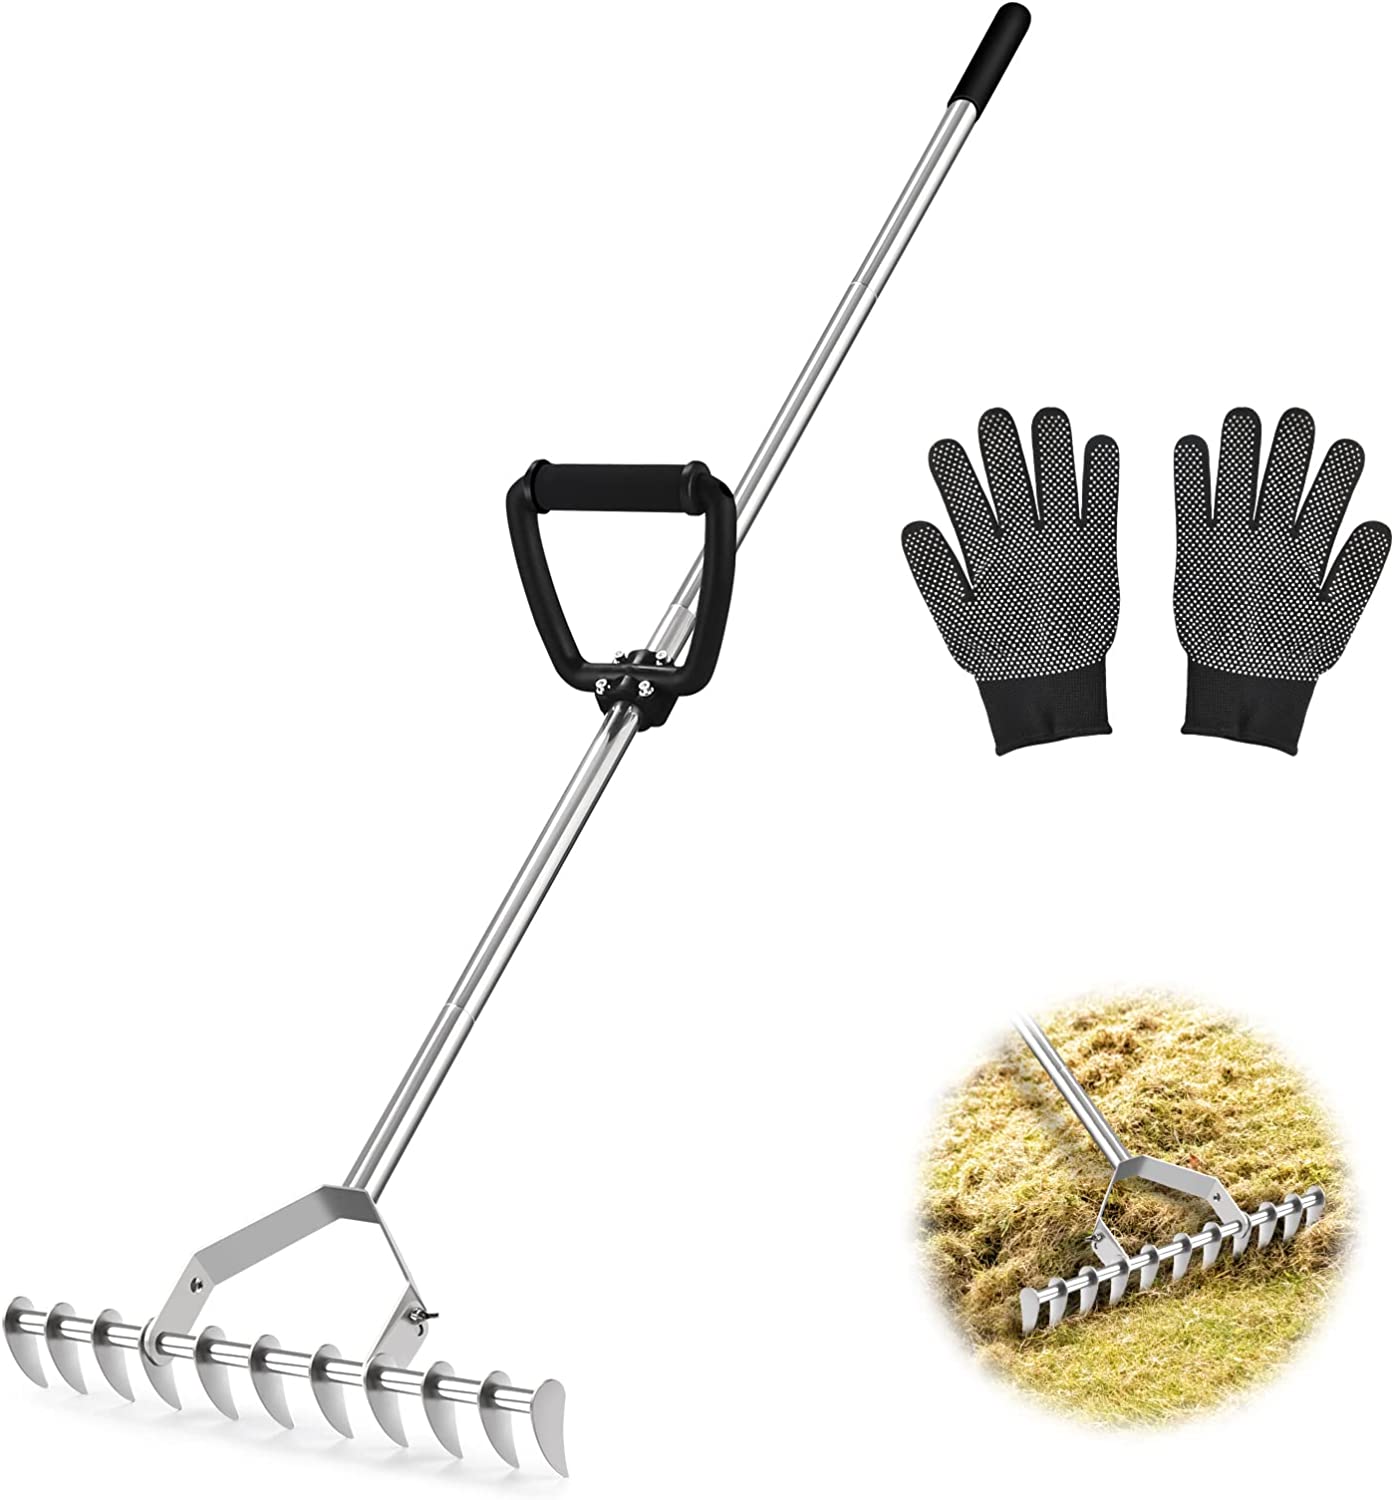 DACK 64" Thatch Rake,Dethatcher Lawn Rake with Back-Saving Handle,Curved Steel Tines for Cleaning Dead Grass,Fertilizing Reseeding Cultivator on Small Yard Garden Made of Stainless Steel with Gloves